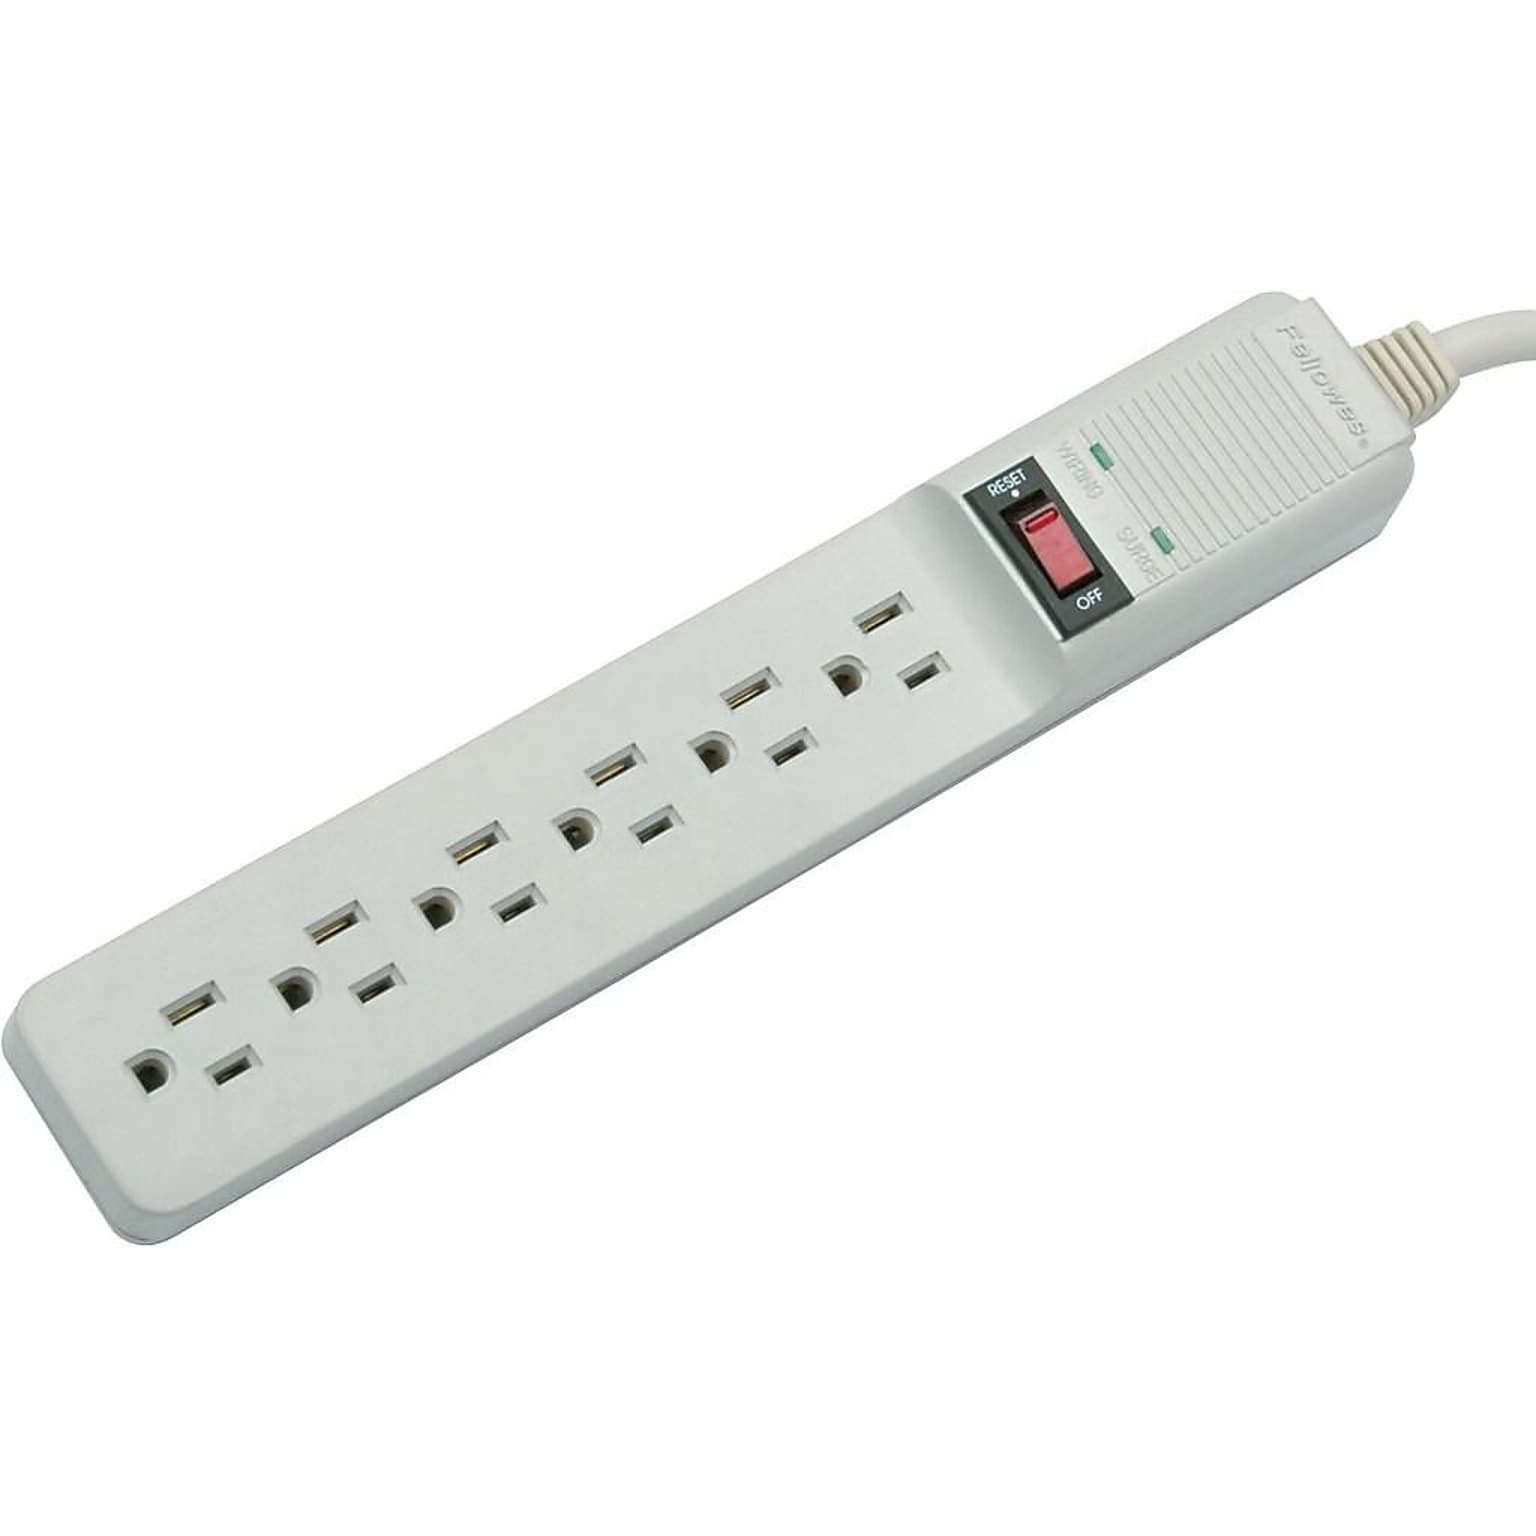 Fellowes 6 Outlets Home/Office Surge Protector, 450 Joules, 6 Cord, Platinum (FEL99012)